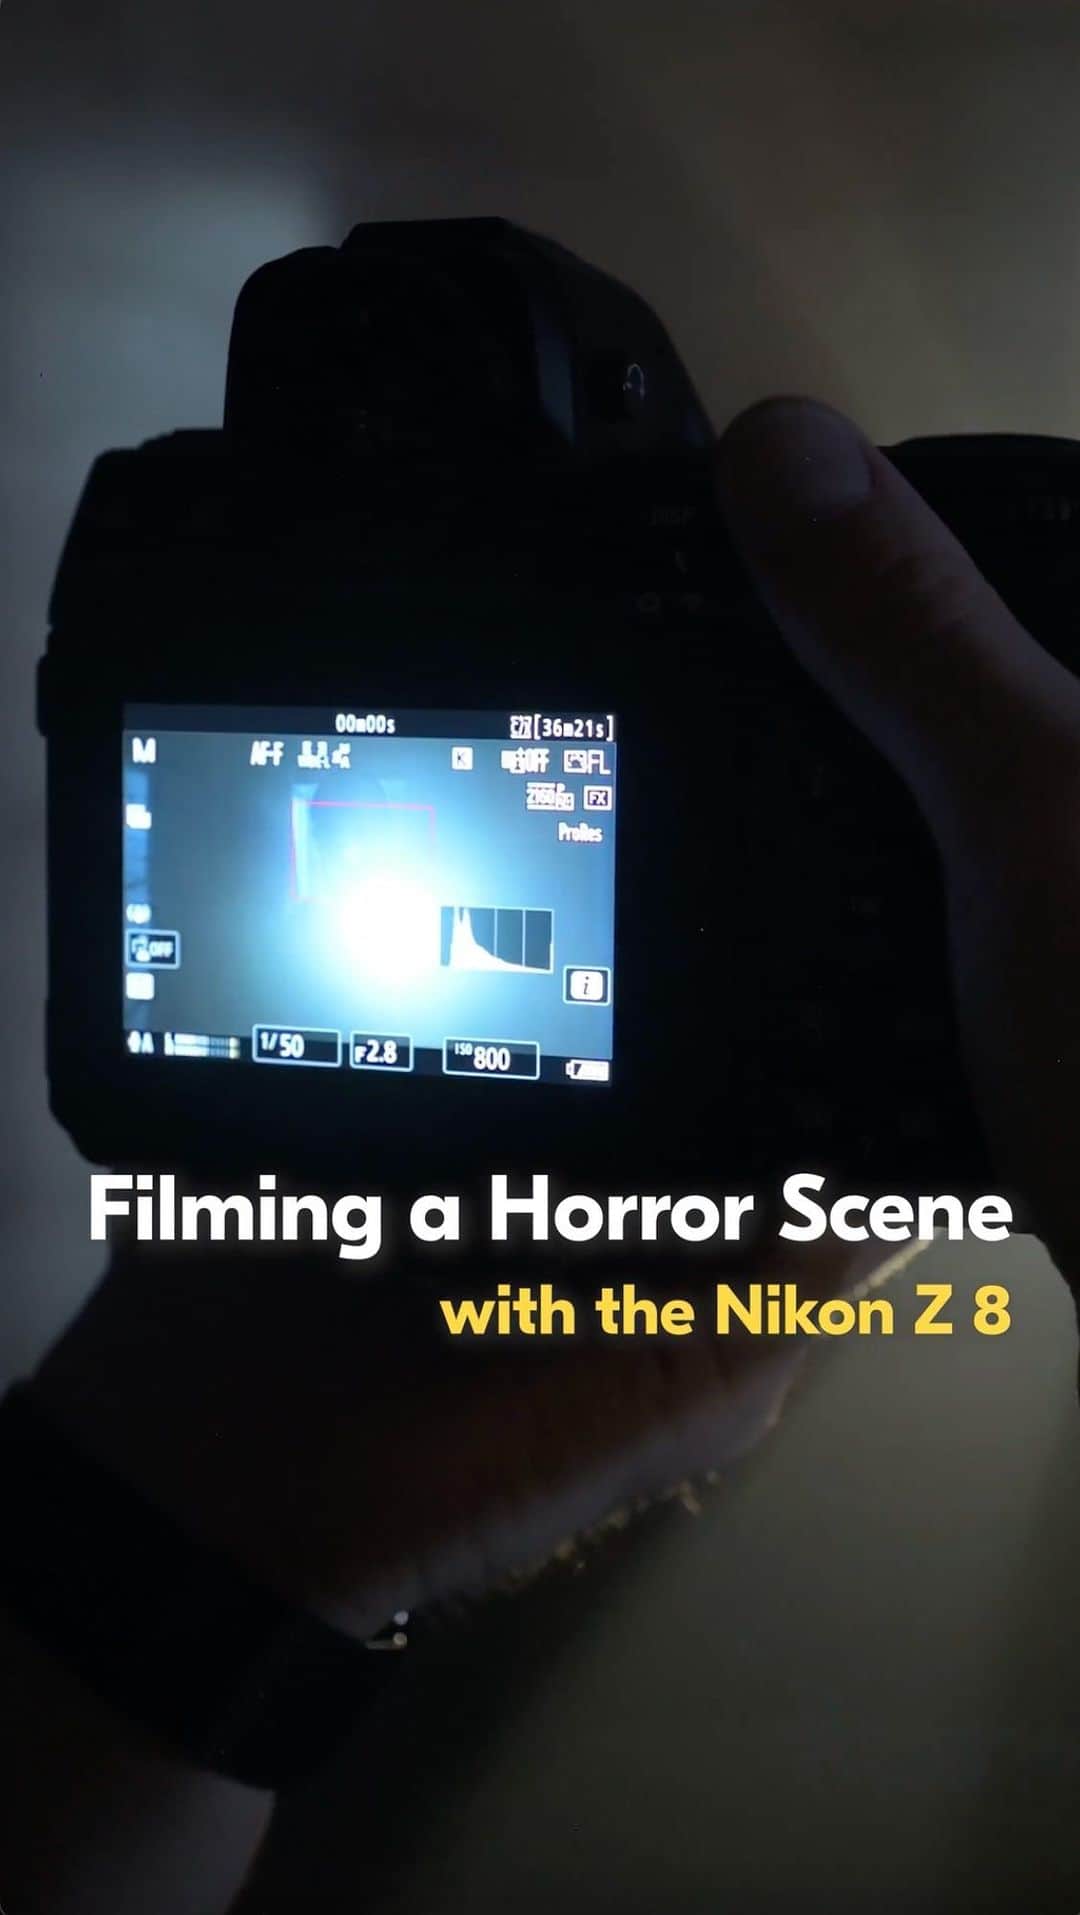 NikonUSAのインスタグラム：「Dark, eerie, and ominous. Here’s how we created a horror short film with the Nikon Z 8, the perfect camera for your next video project! Go behind-the-scenes to see how we captured dramatic & eerie scenes with its low-light capabilities, and shot from a variety of creative angles with its lightweight design.  What are your tips for eerie short films or photoshoots?  Tag @NikonUSA when you create your own short film, for a chance to be re-shared.  #Nikon #Z8 #HorrorShort #FilmmakingTips #NikonCreators」